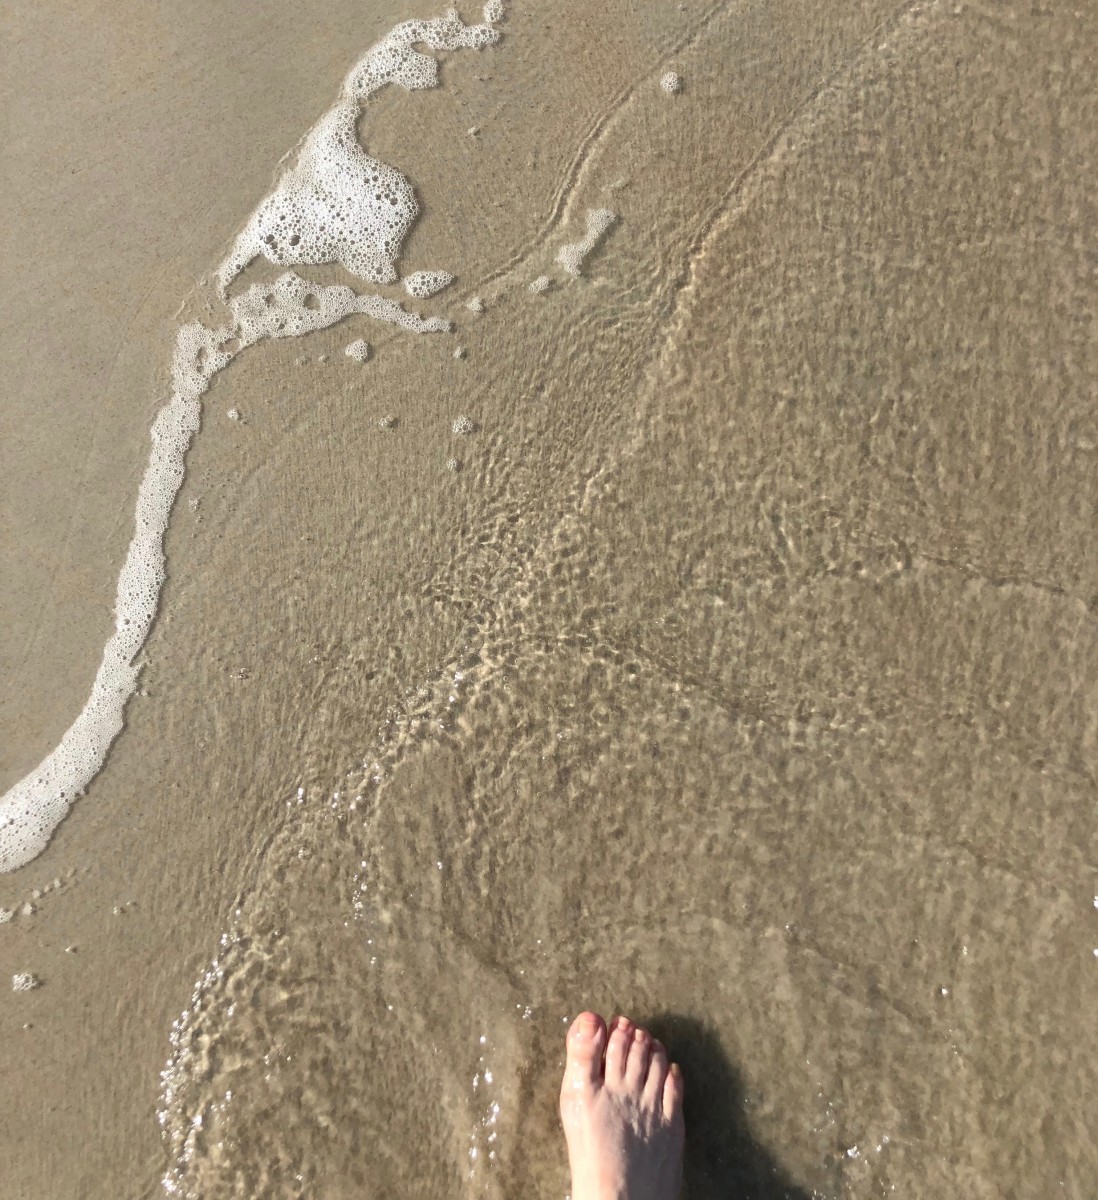 I love walking on the beach, and letting the waves lap over my toes.